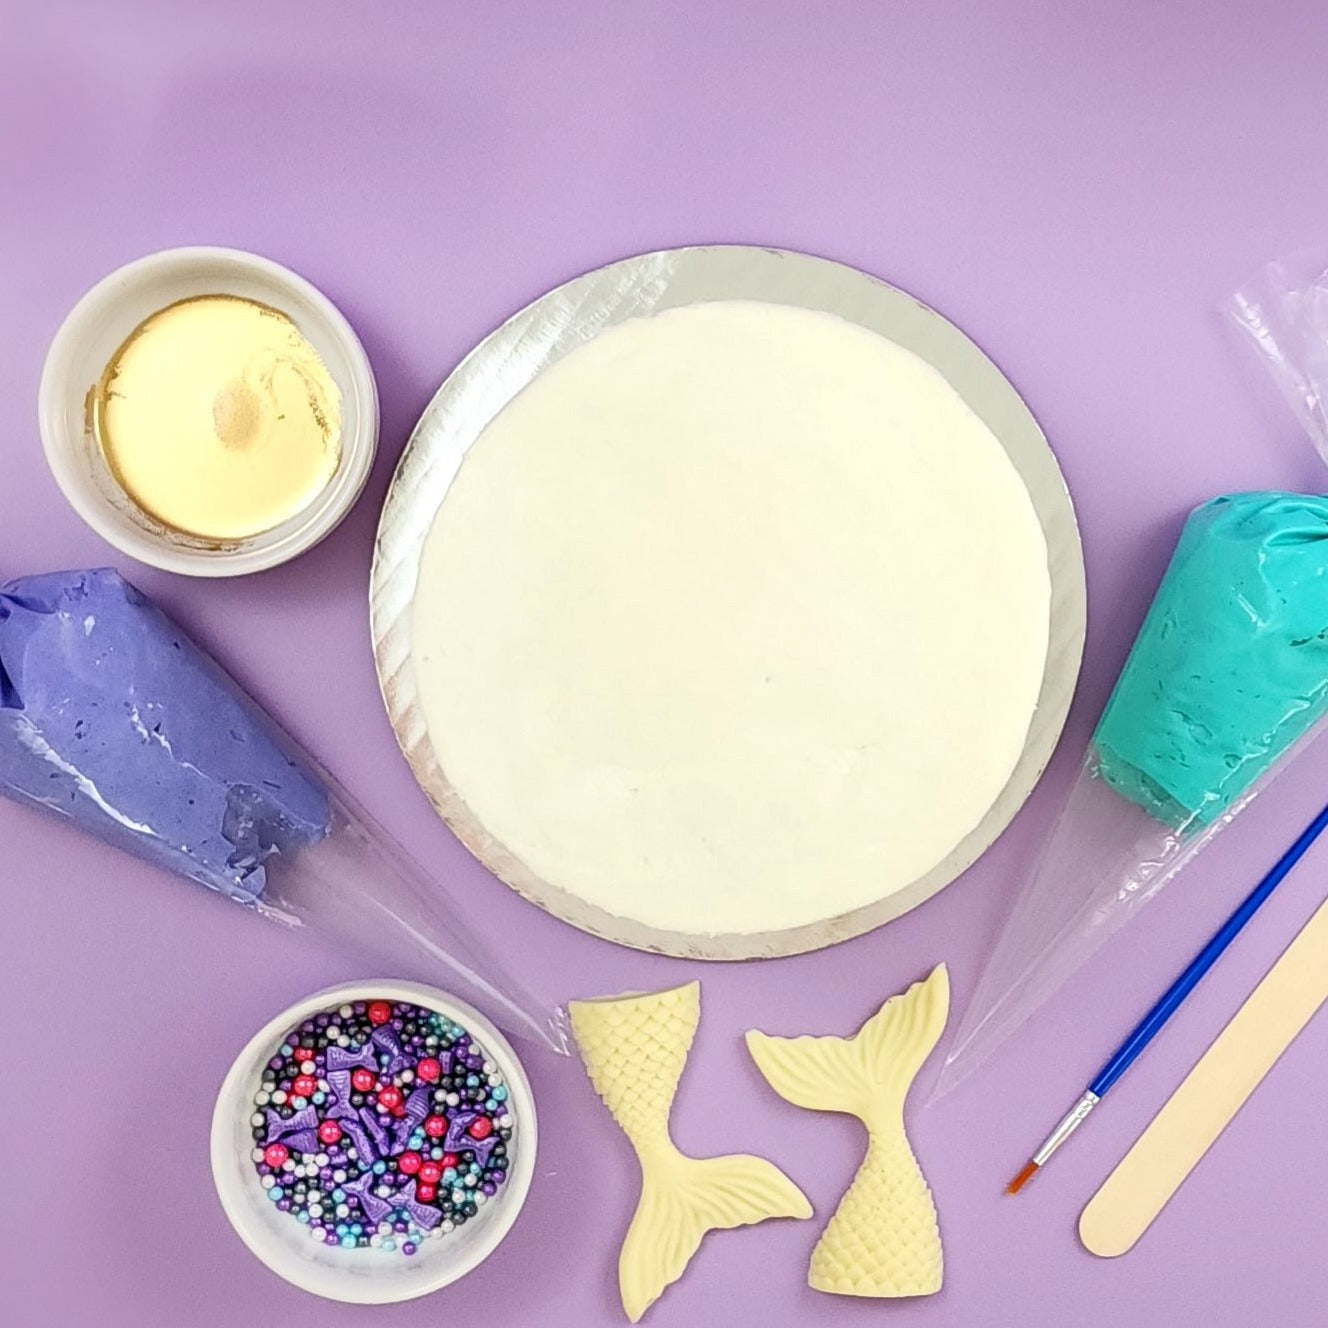 The components of the "Mermaid's Tale" DIY cake-decorating kit: gold paint, purple and teal frosting in piping bags, a paintbrush, a wood spatula, two white chocolate mermaid tales, sprinkle mix with purple, pink, white, blue, and gray sprinkles, and a cake frosted in white vanilla buttercream. Not shown is the easy-to-follow instruction card you will also receive.